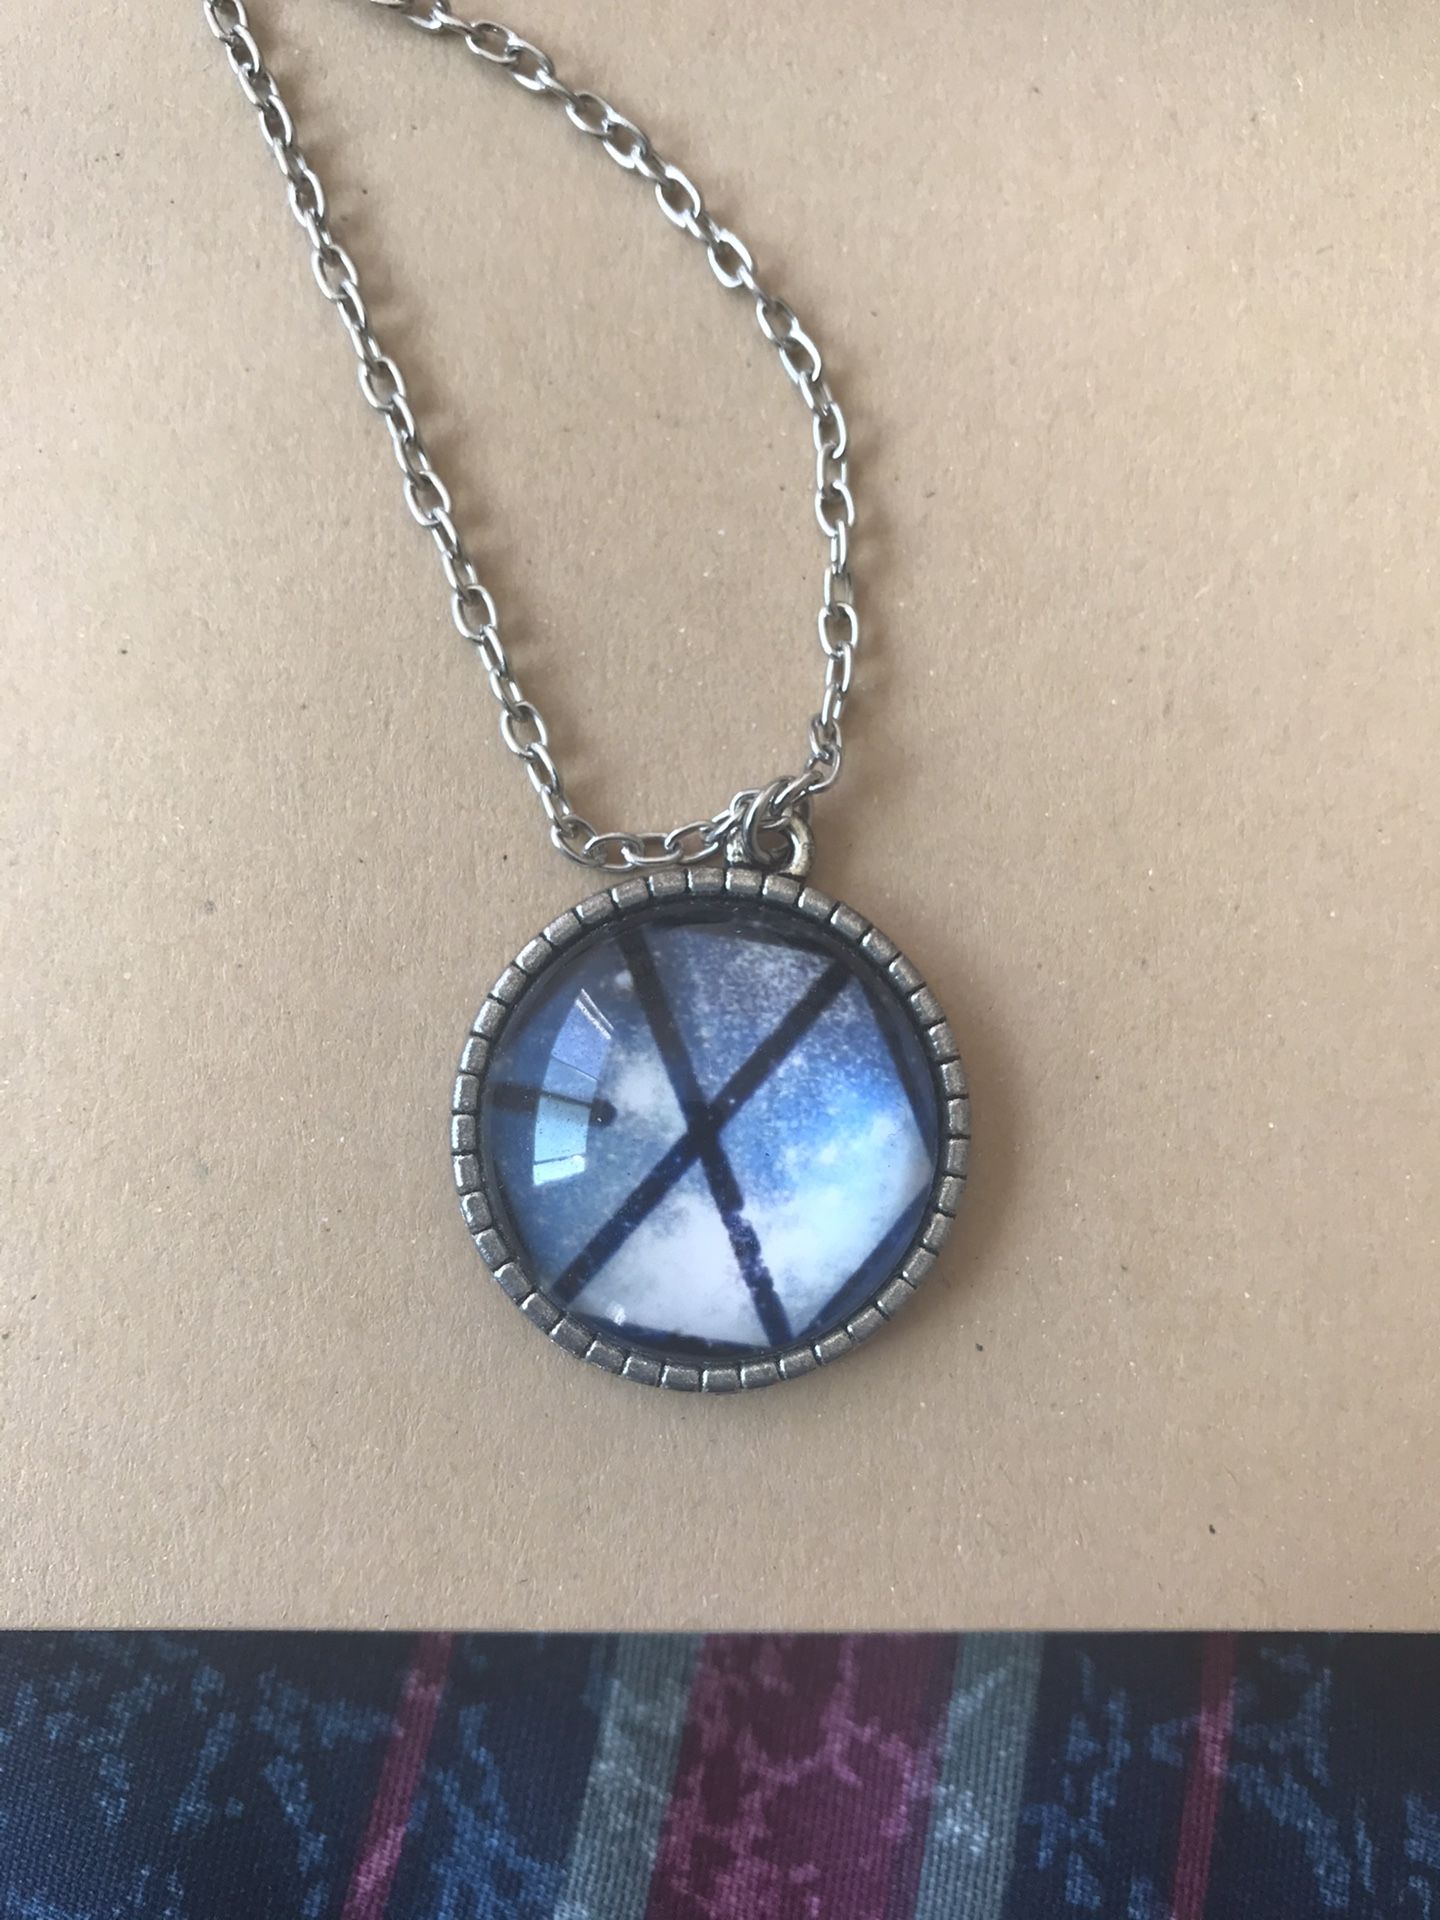 Free EXO Kpop necklace